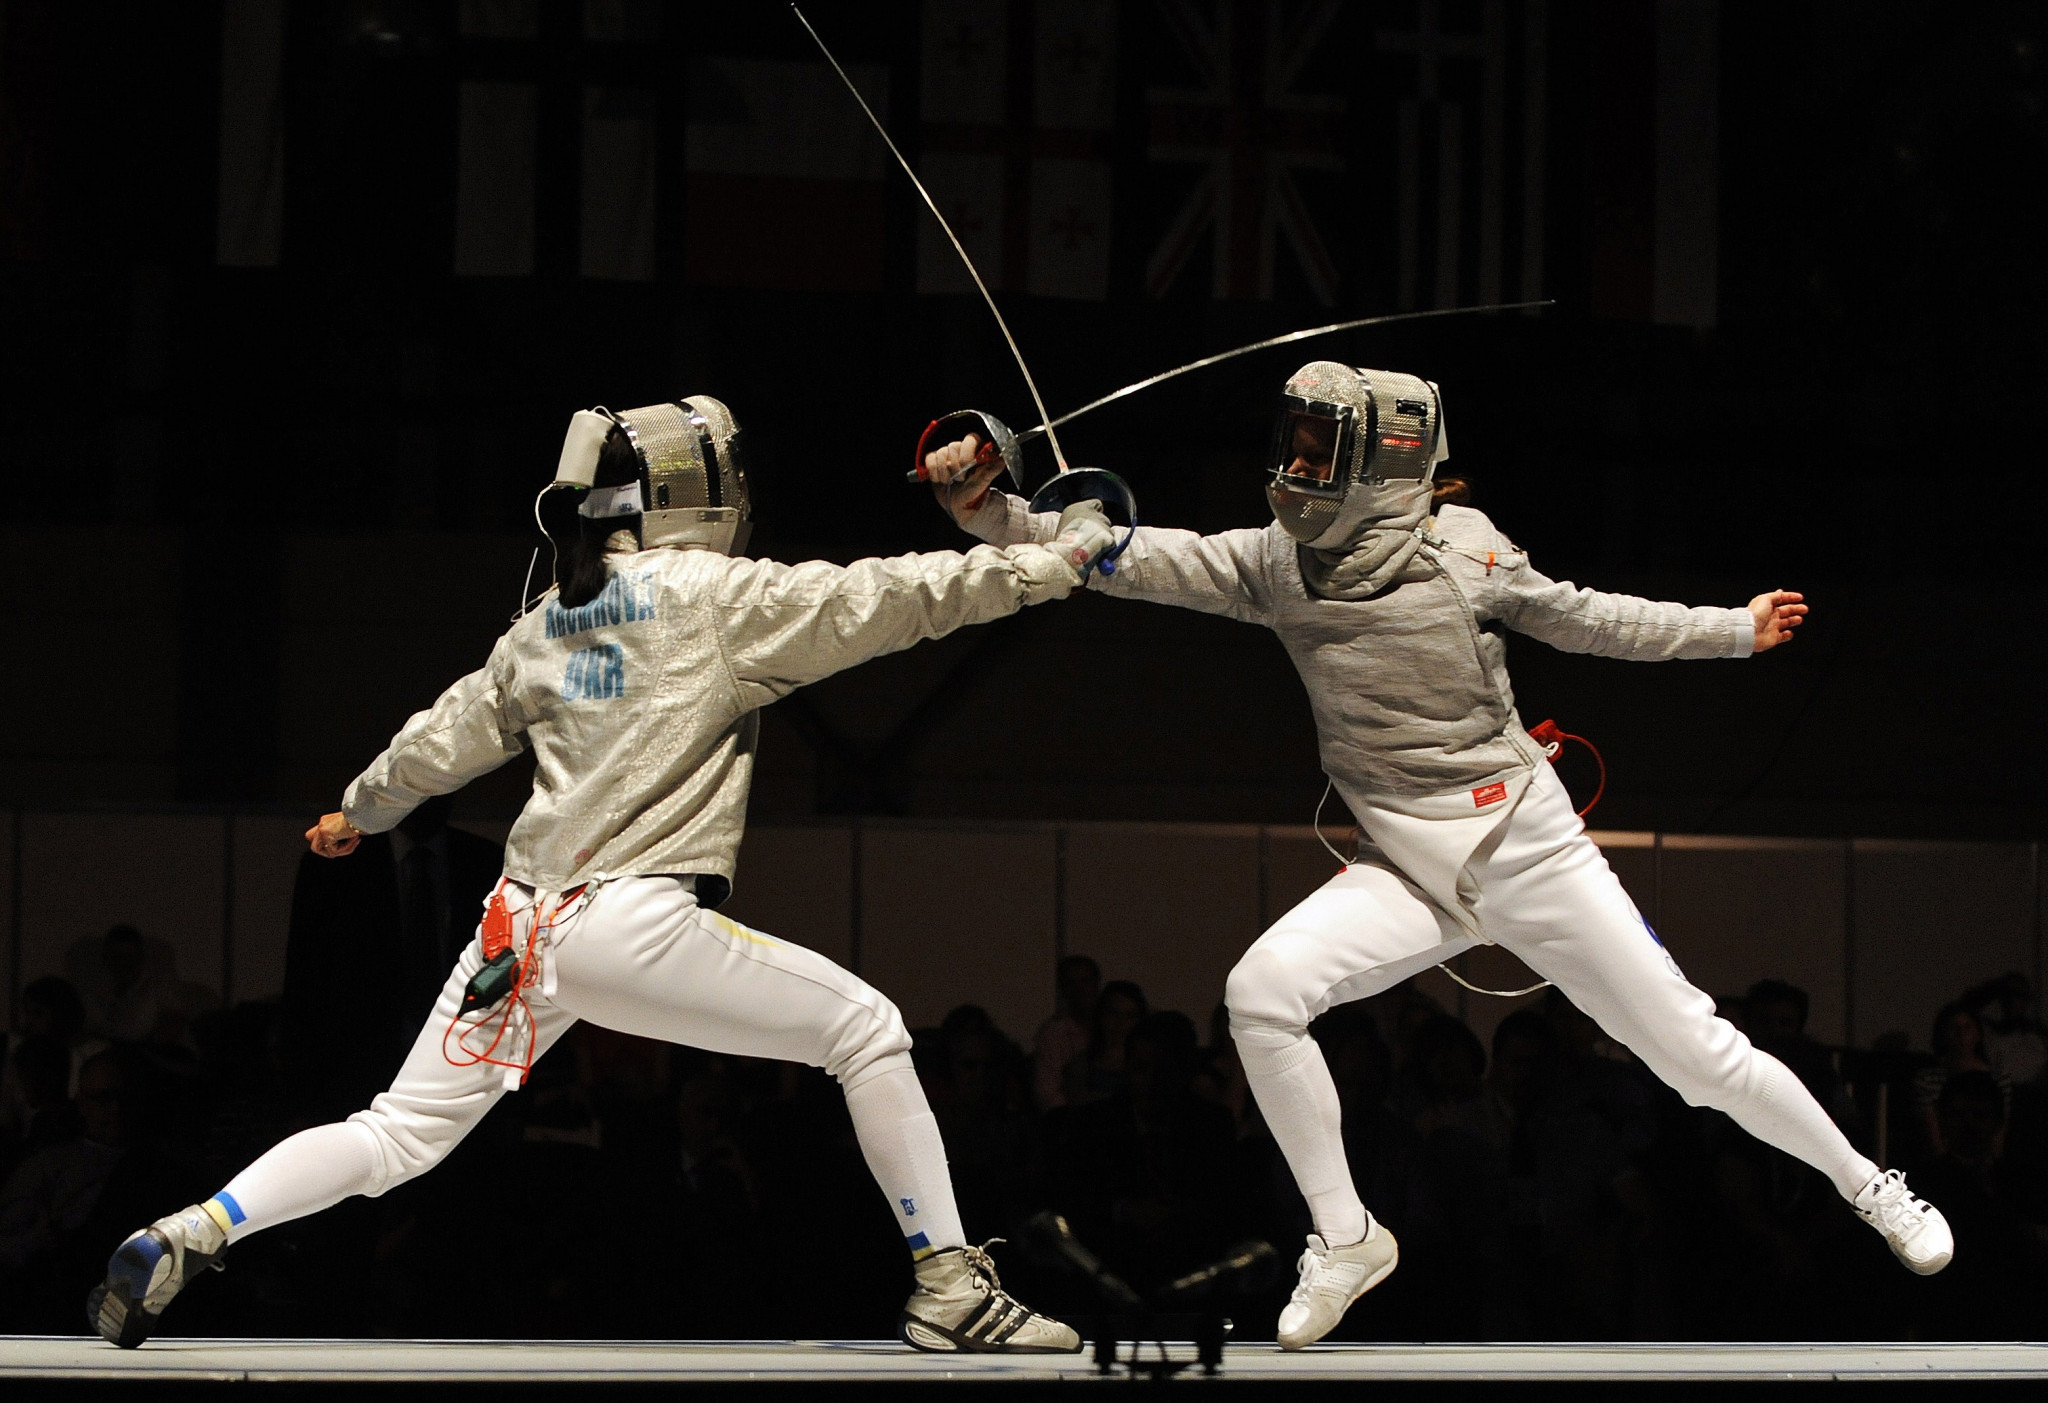 Plovdiv awarded 2021 European Fencing Championships as Sochi submits bid for 2022 edition